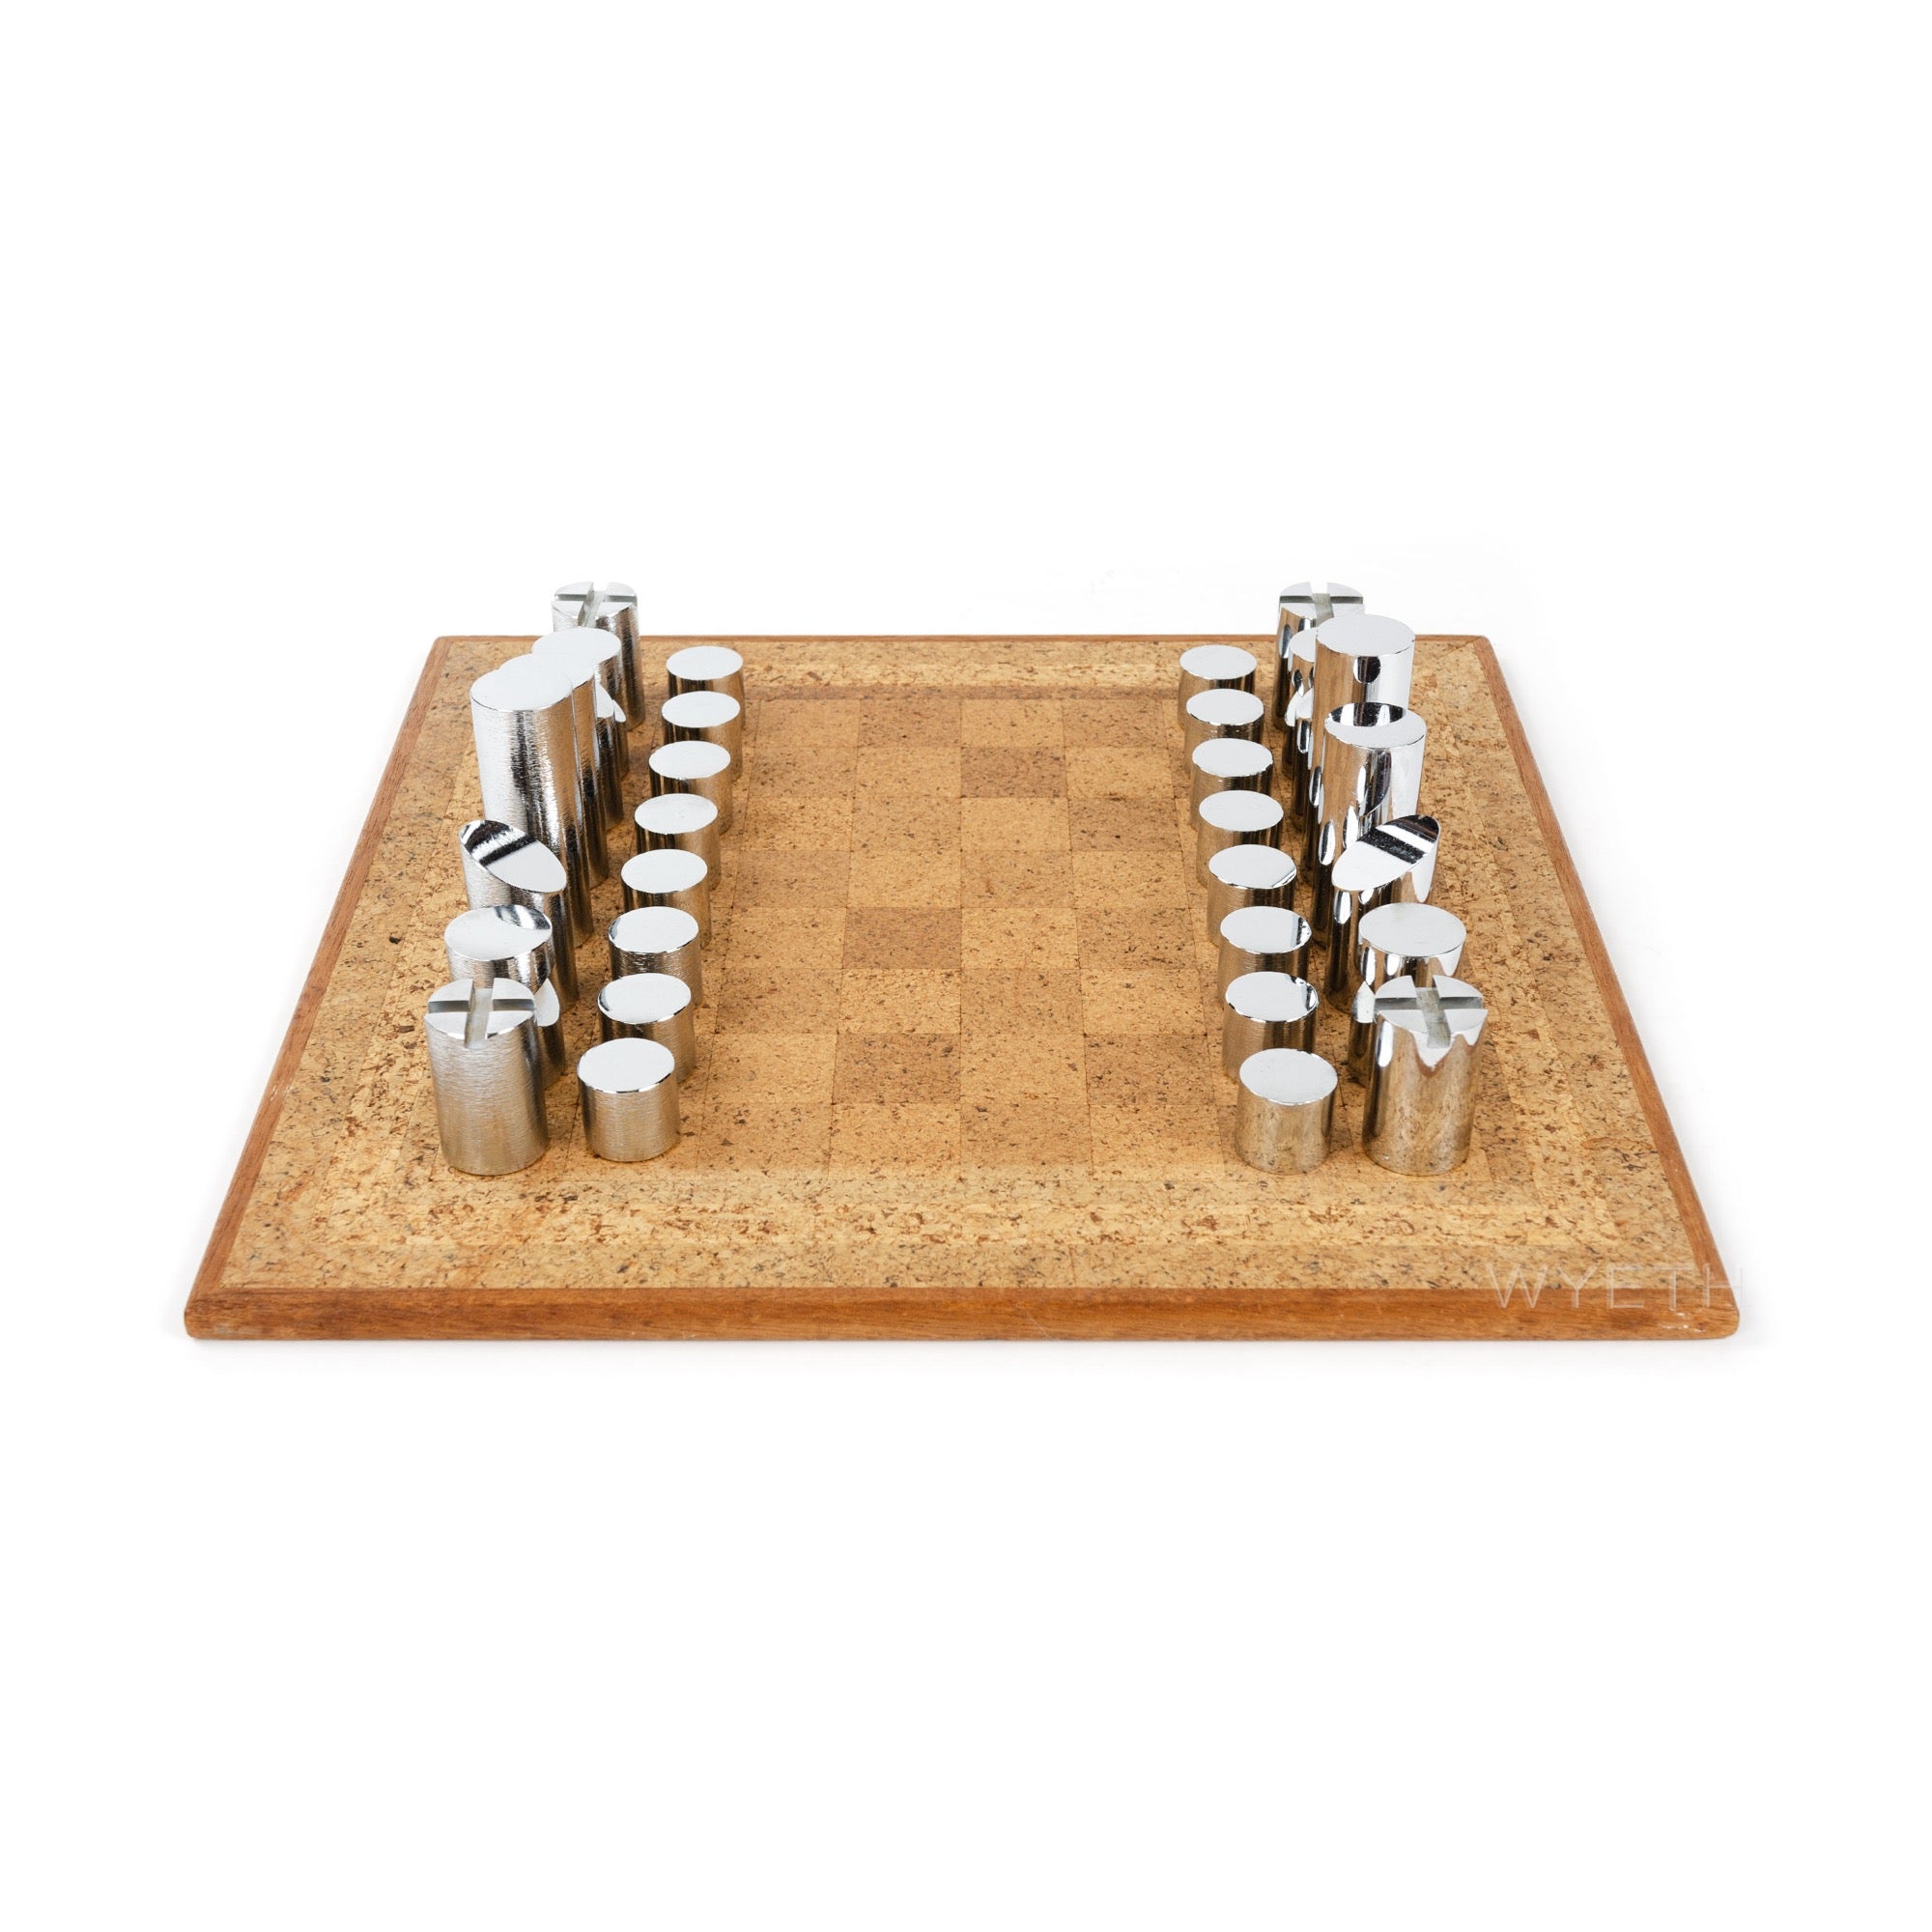 Chess Set from USA